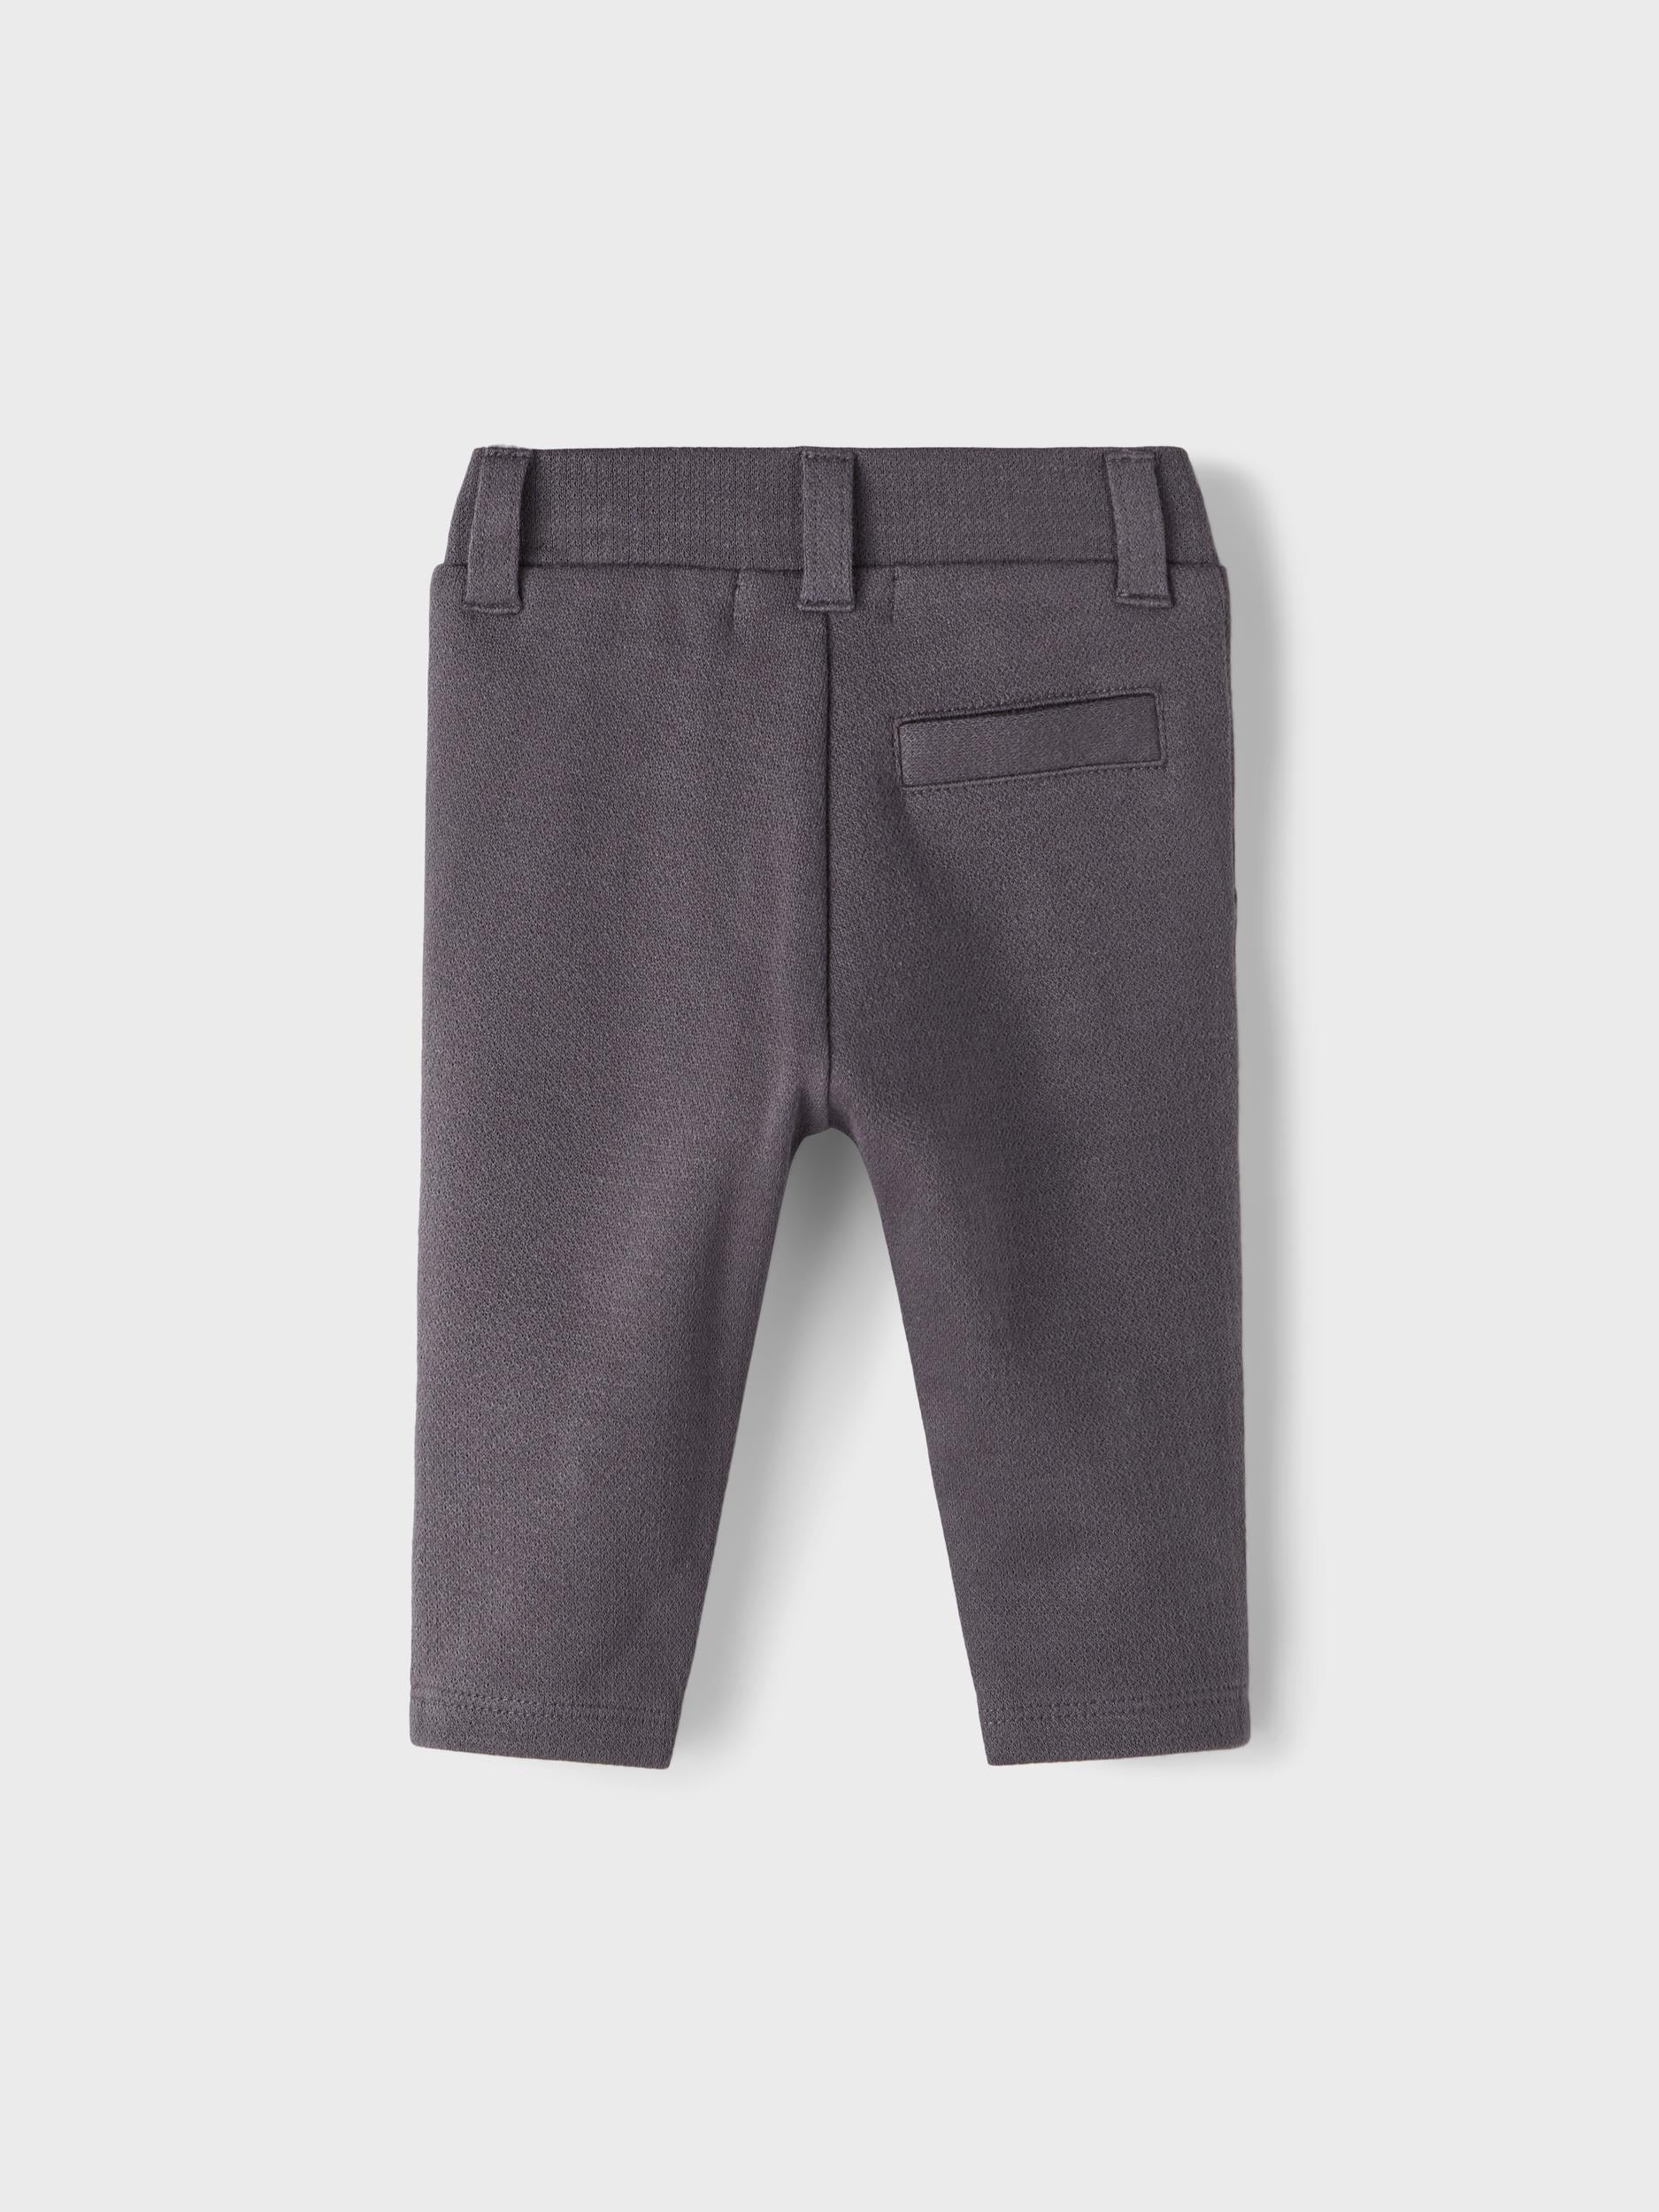 Lil Atelier Dicard Pant - Periscope